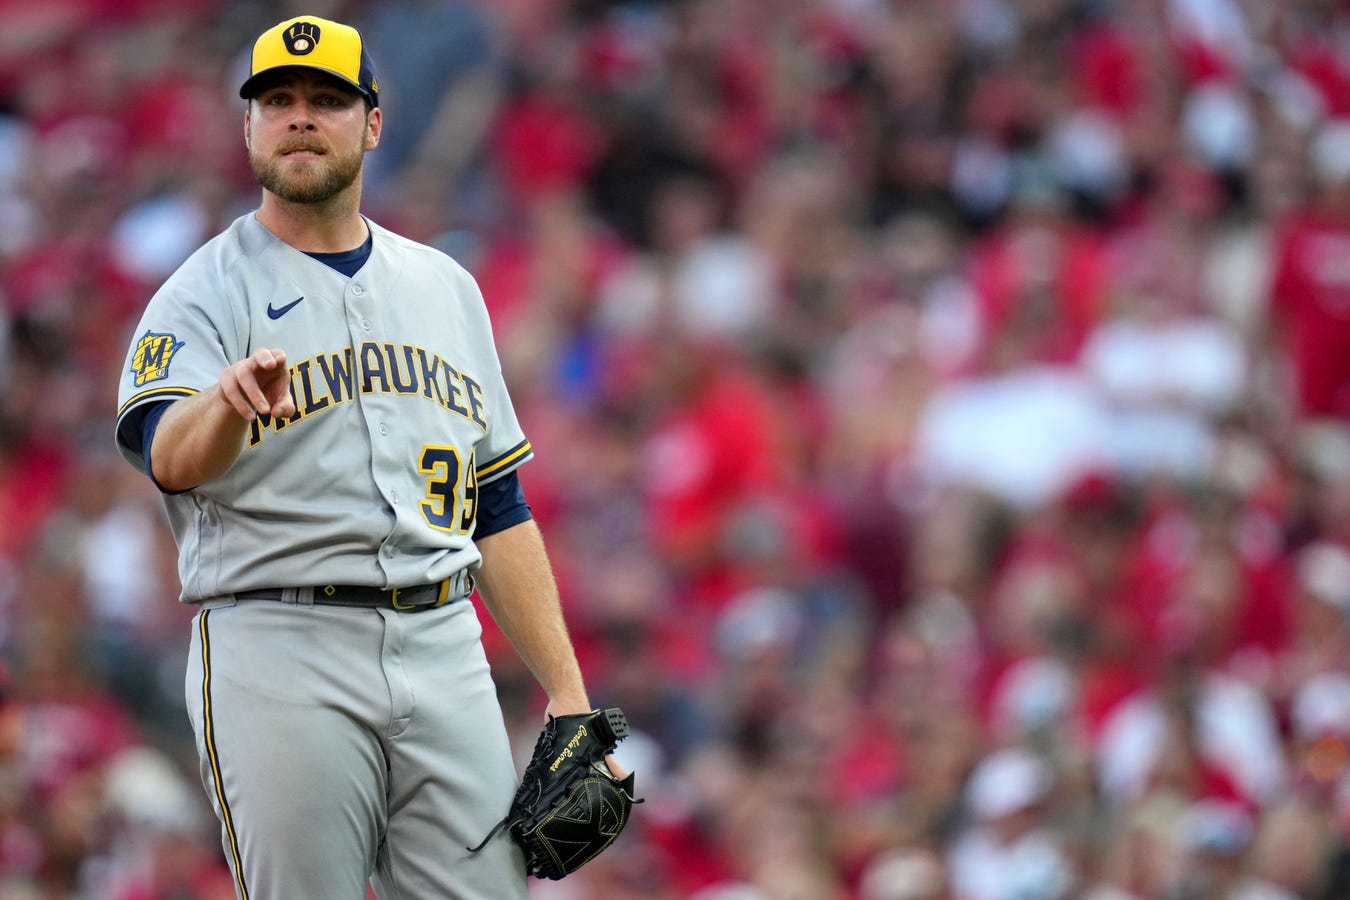 Burnes ties MLB record with 10 straight strikeouts